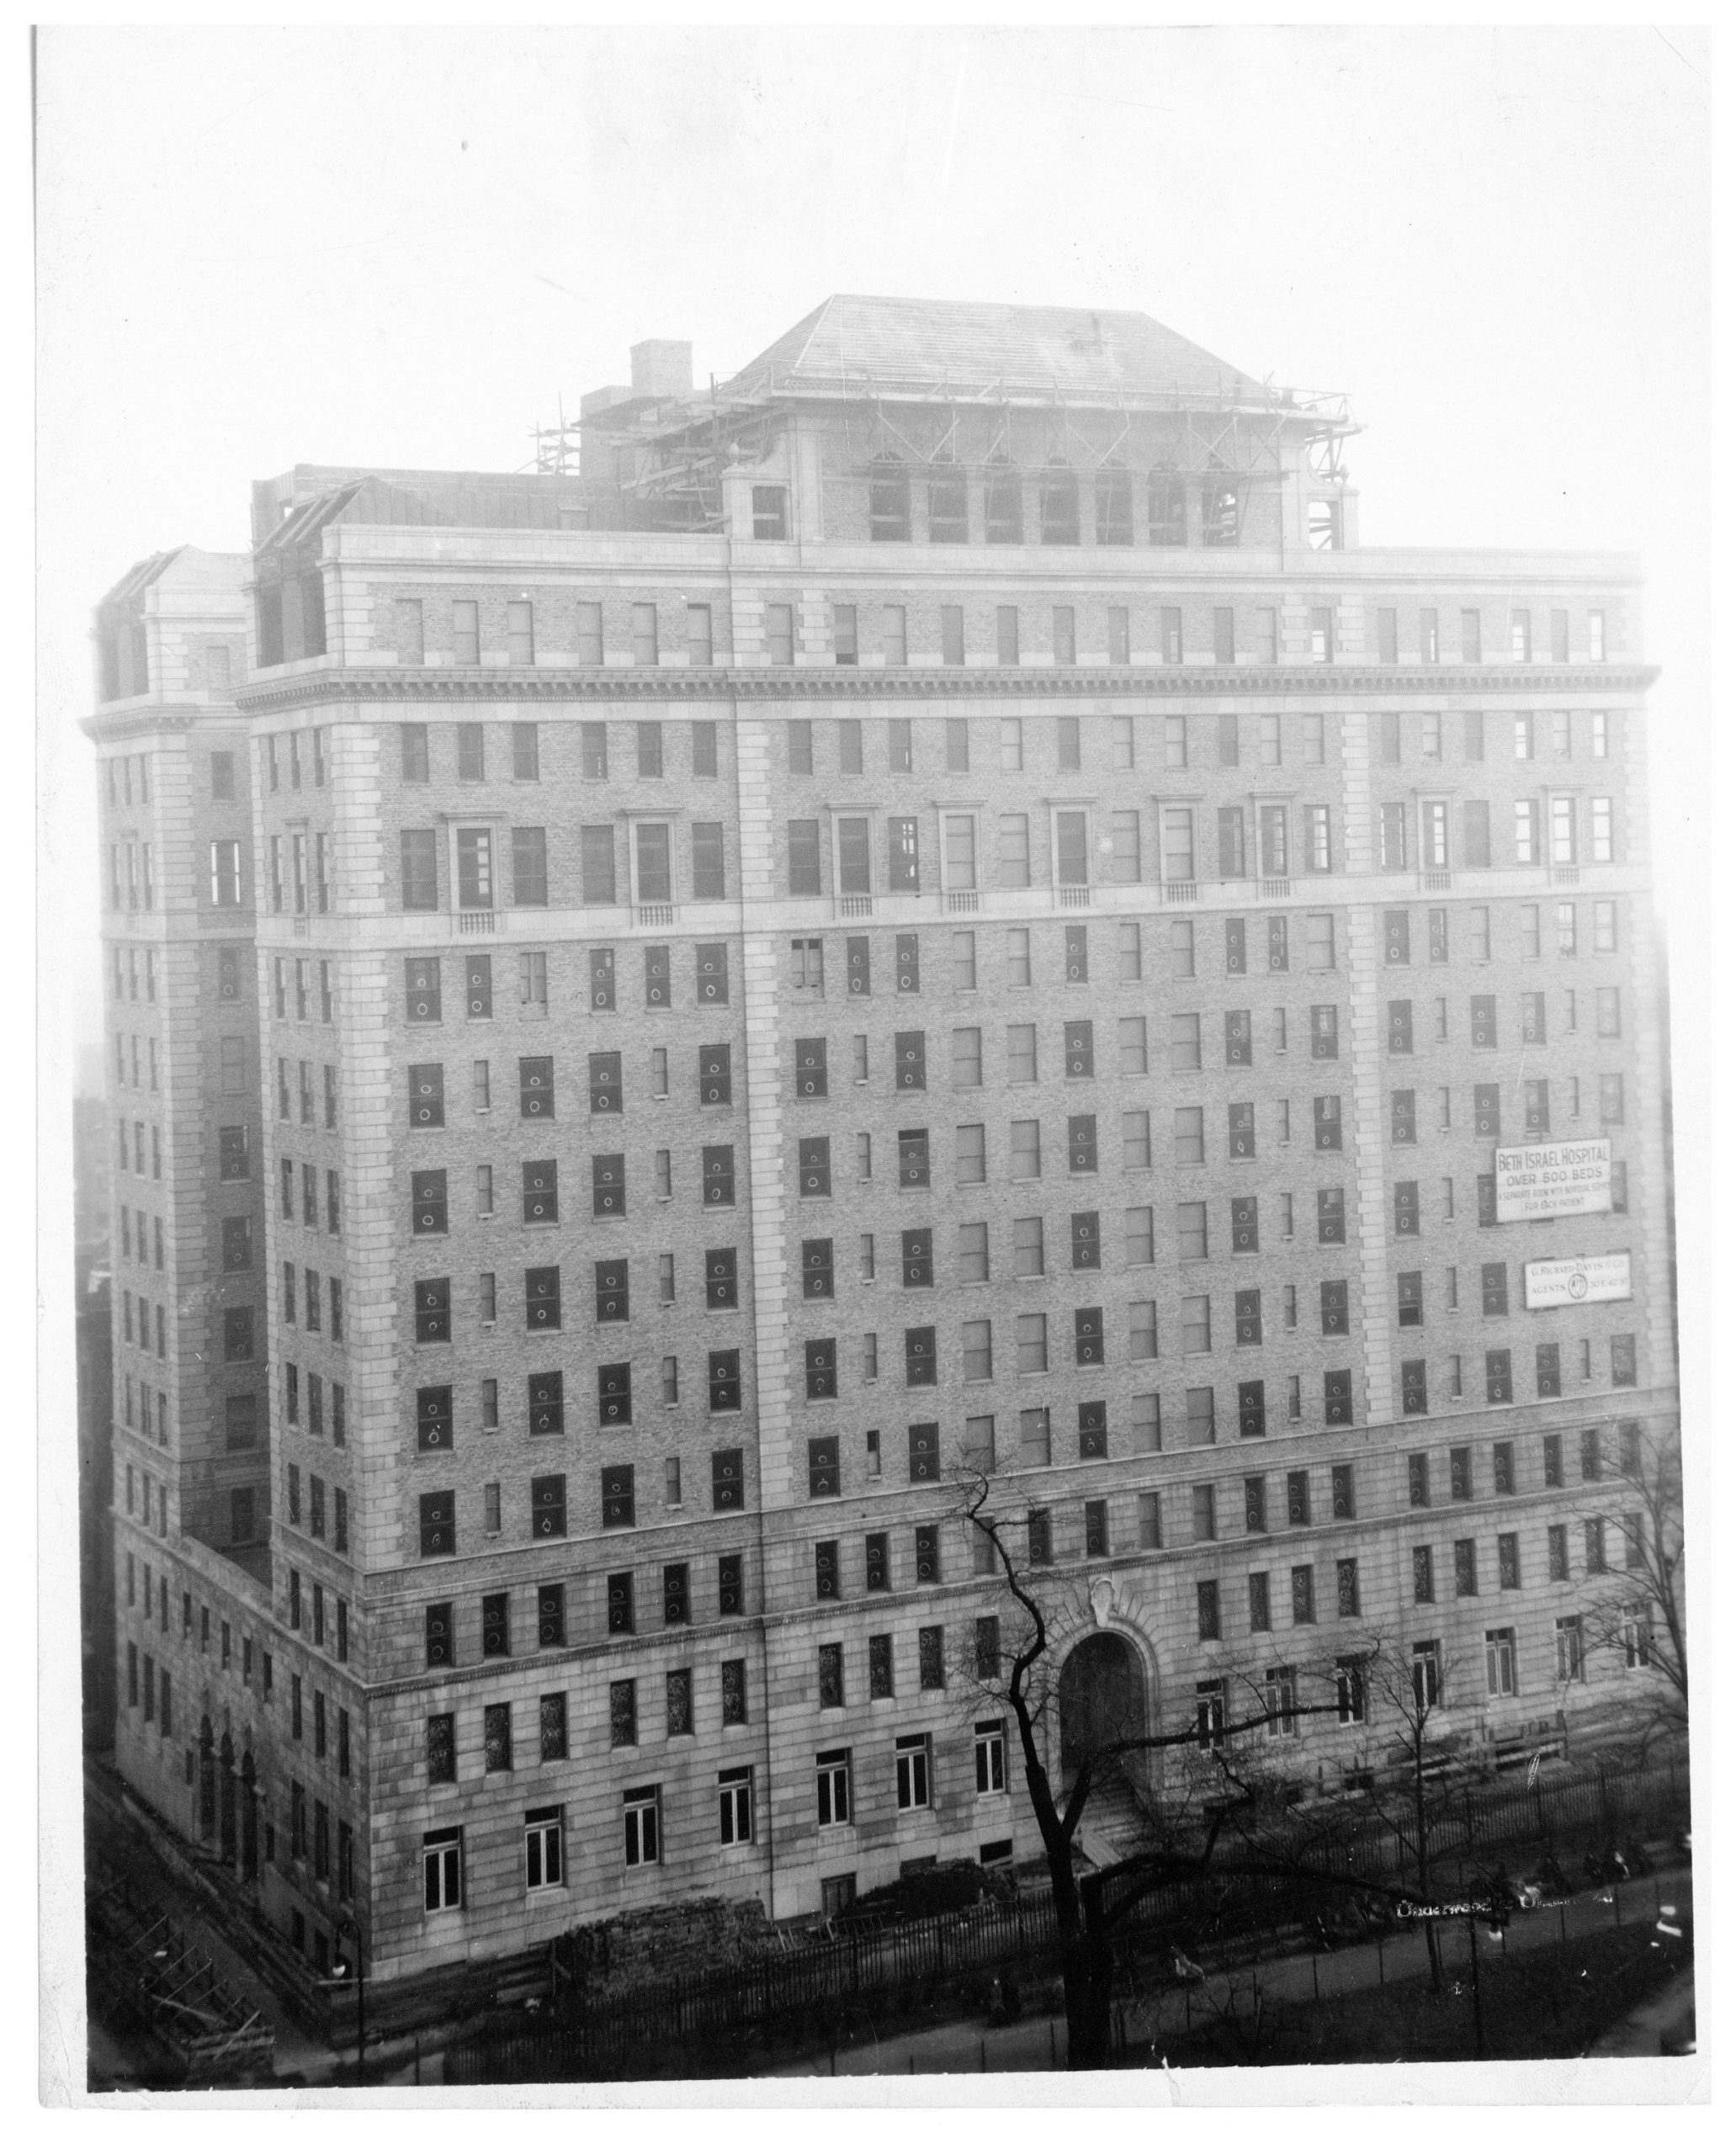 Black-and-white photograph of Dazian Pavillion including sign that says "Beth Israel Hospital: Over 500 beds, a separate room with individual service for each patient"